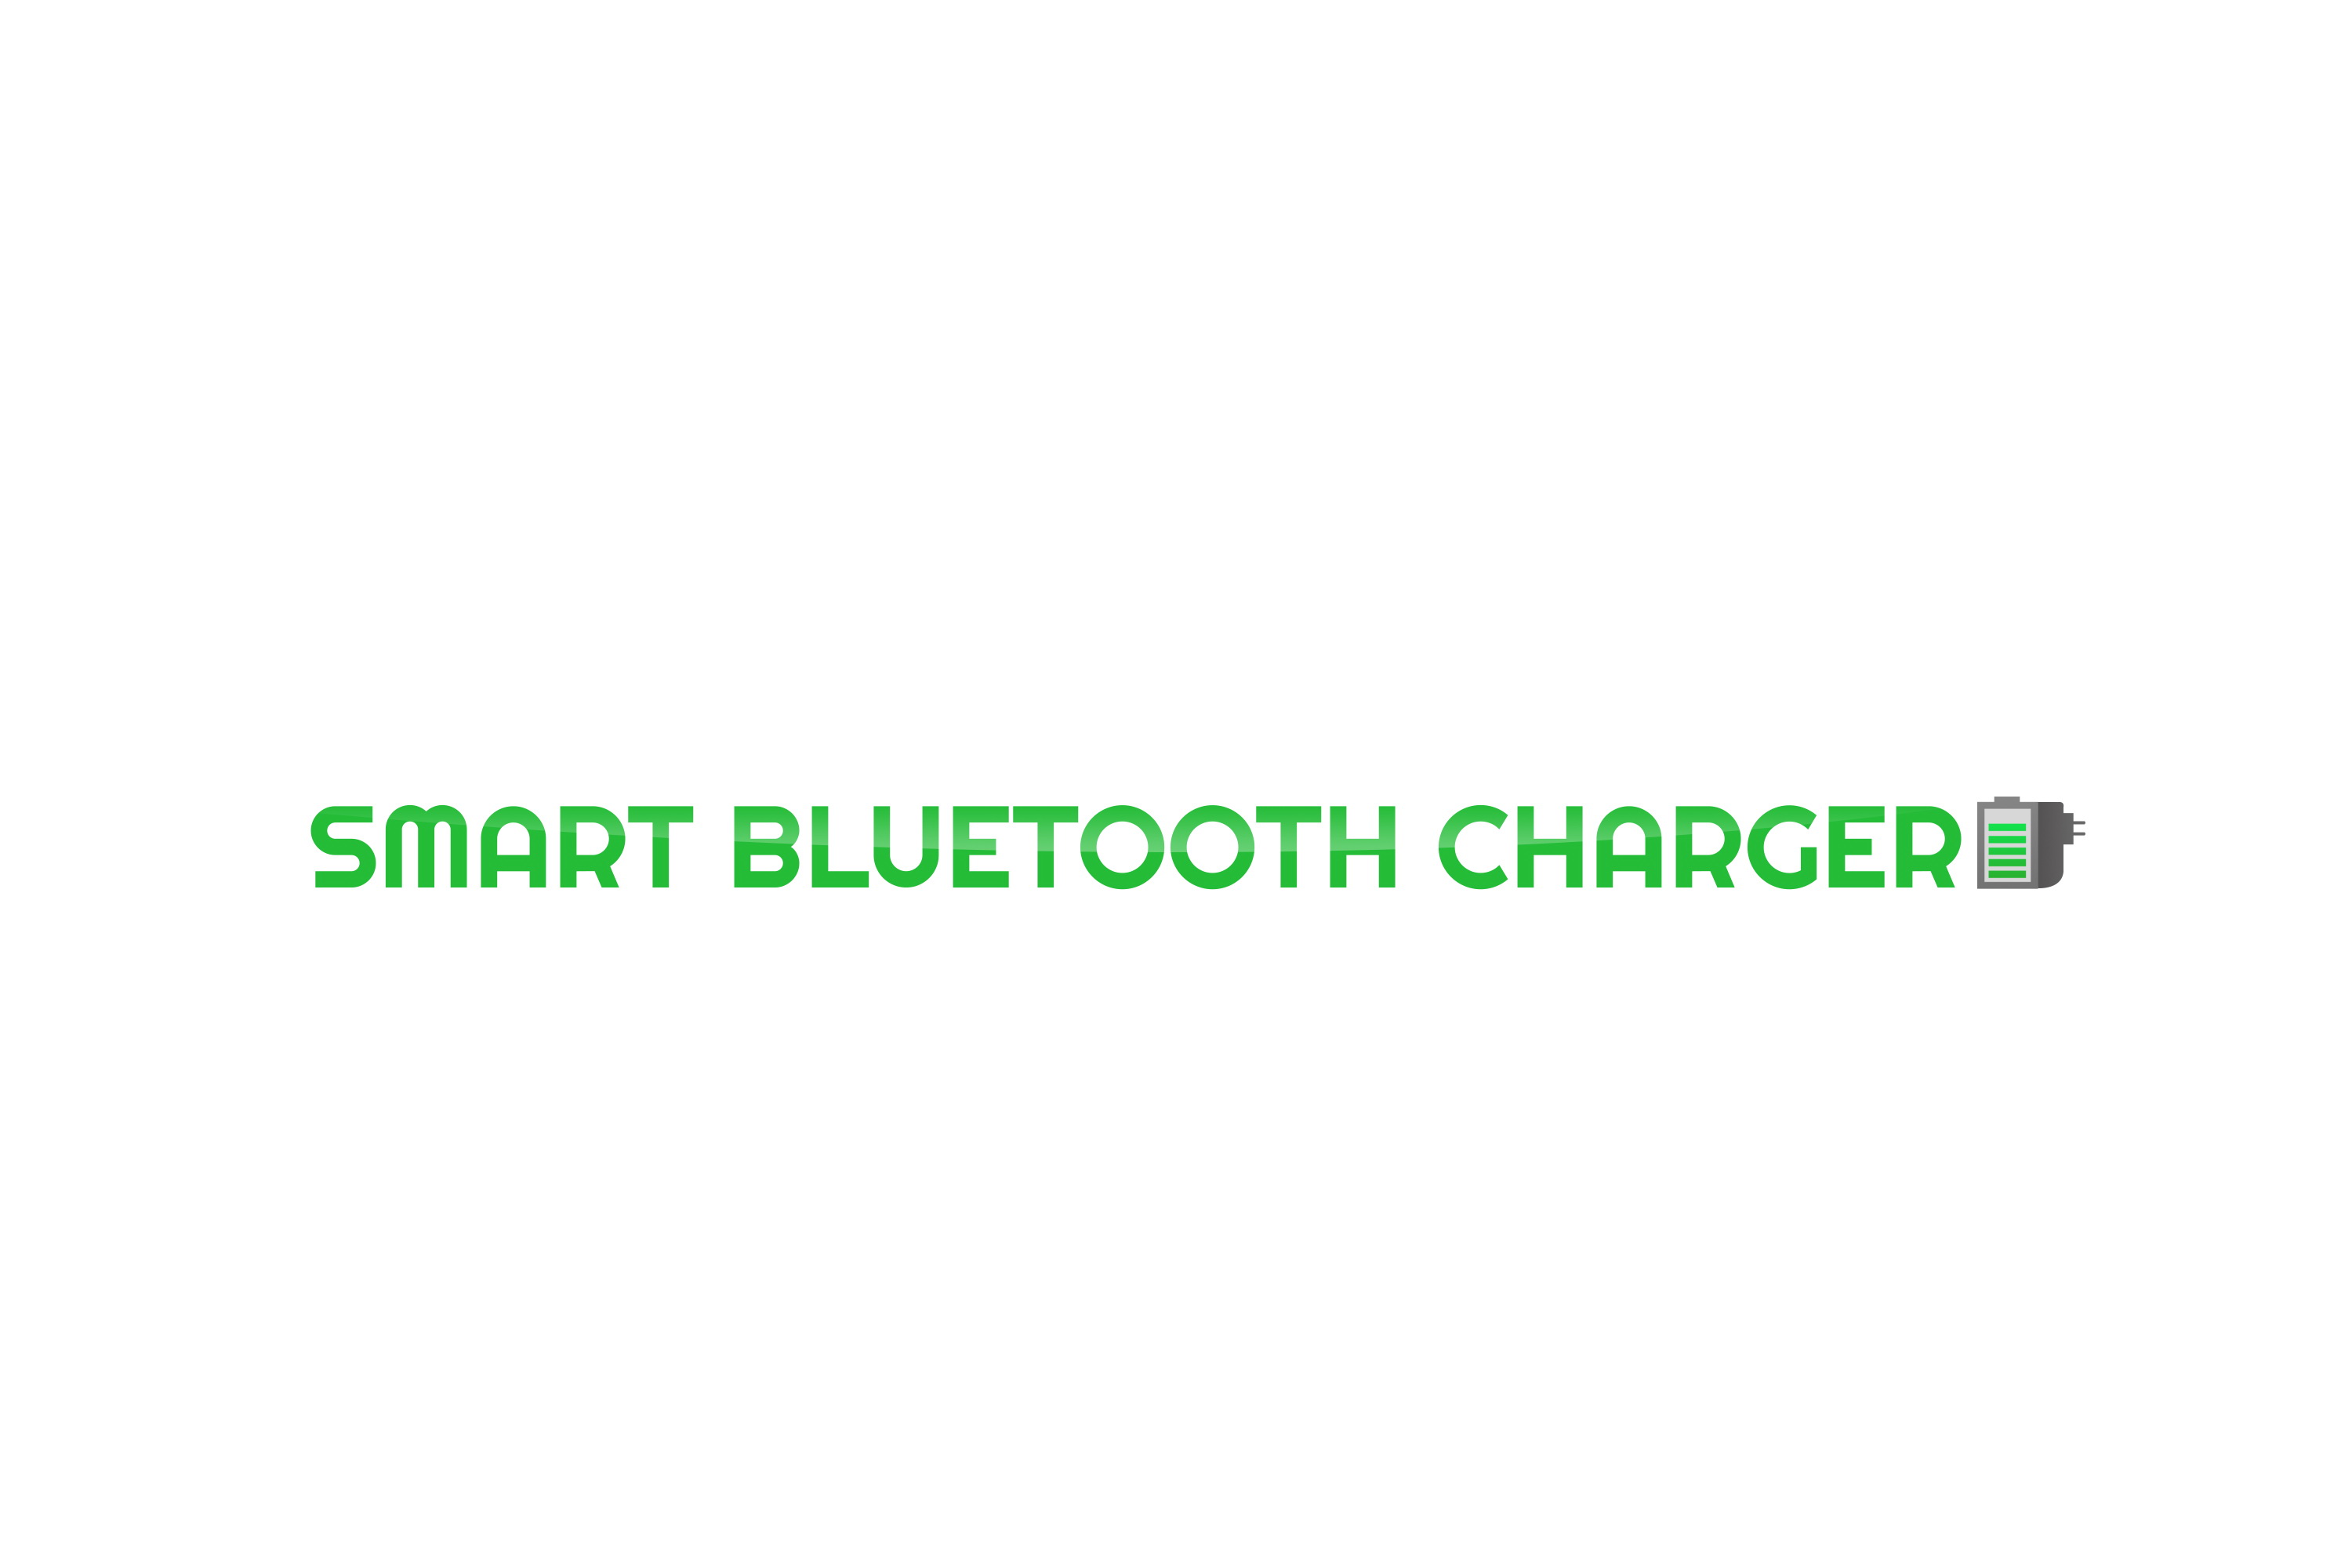 The Smart Bluetooth Charger is very helpful for anyone who owns a smart device.